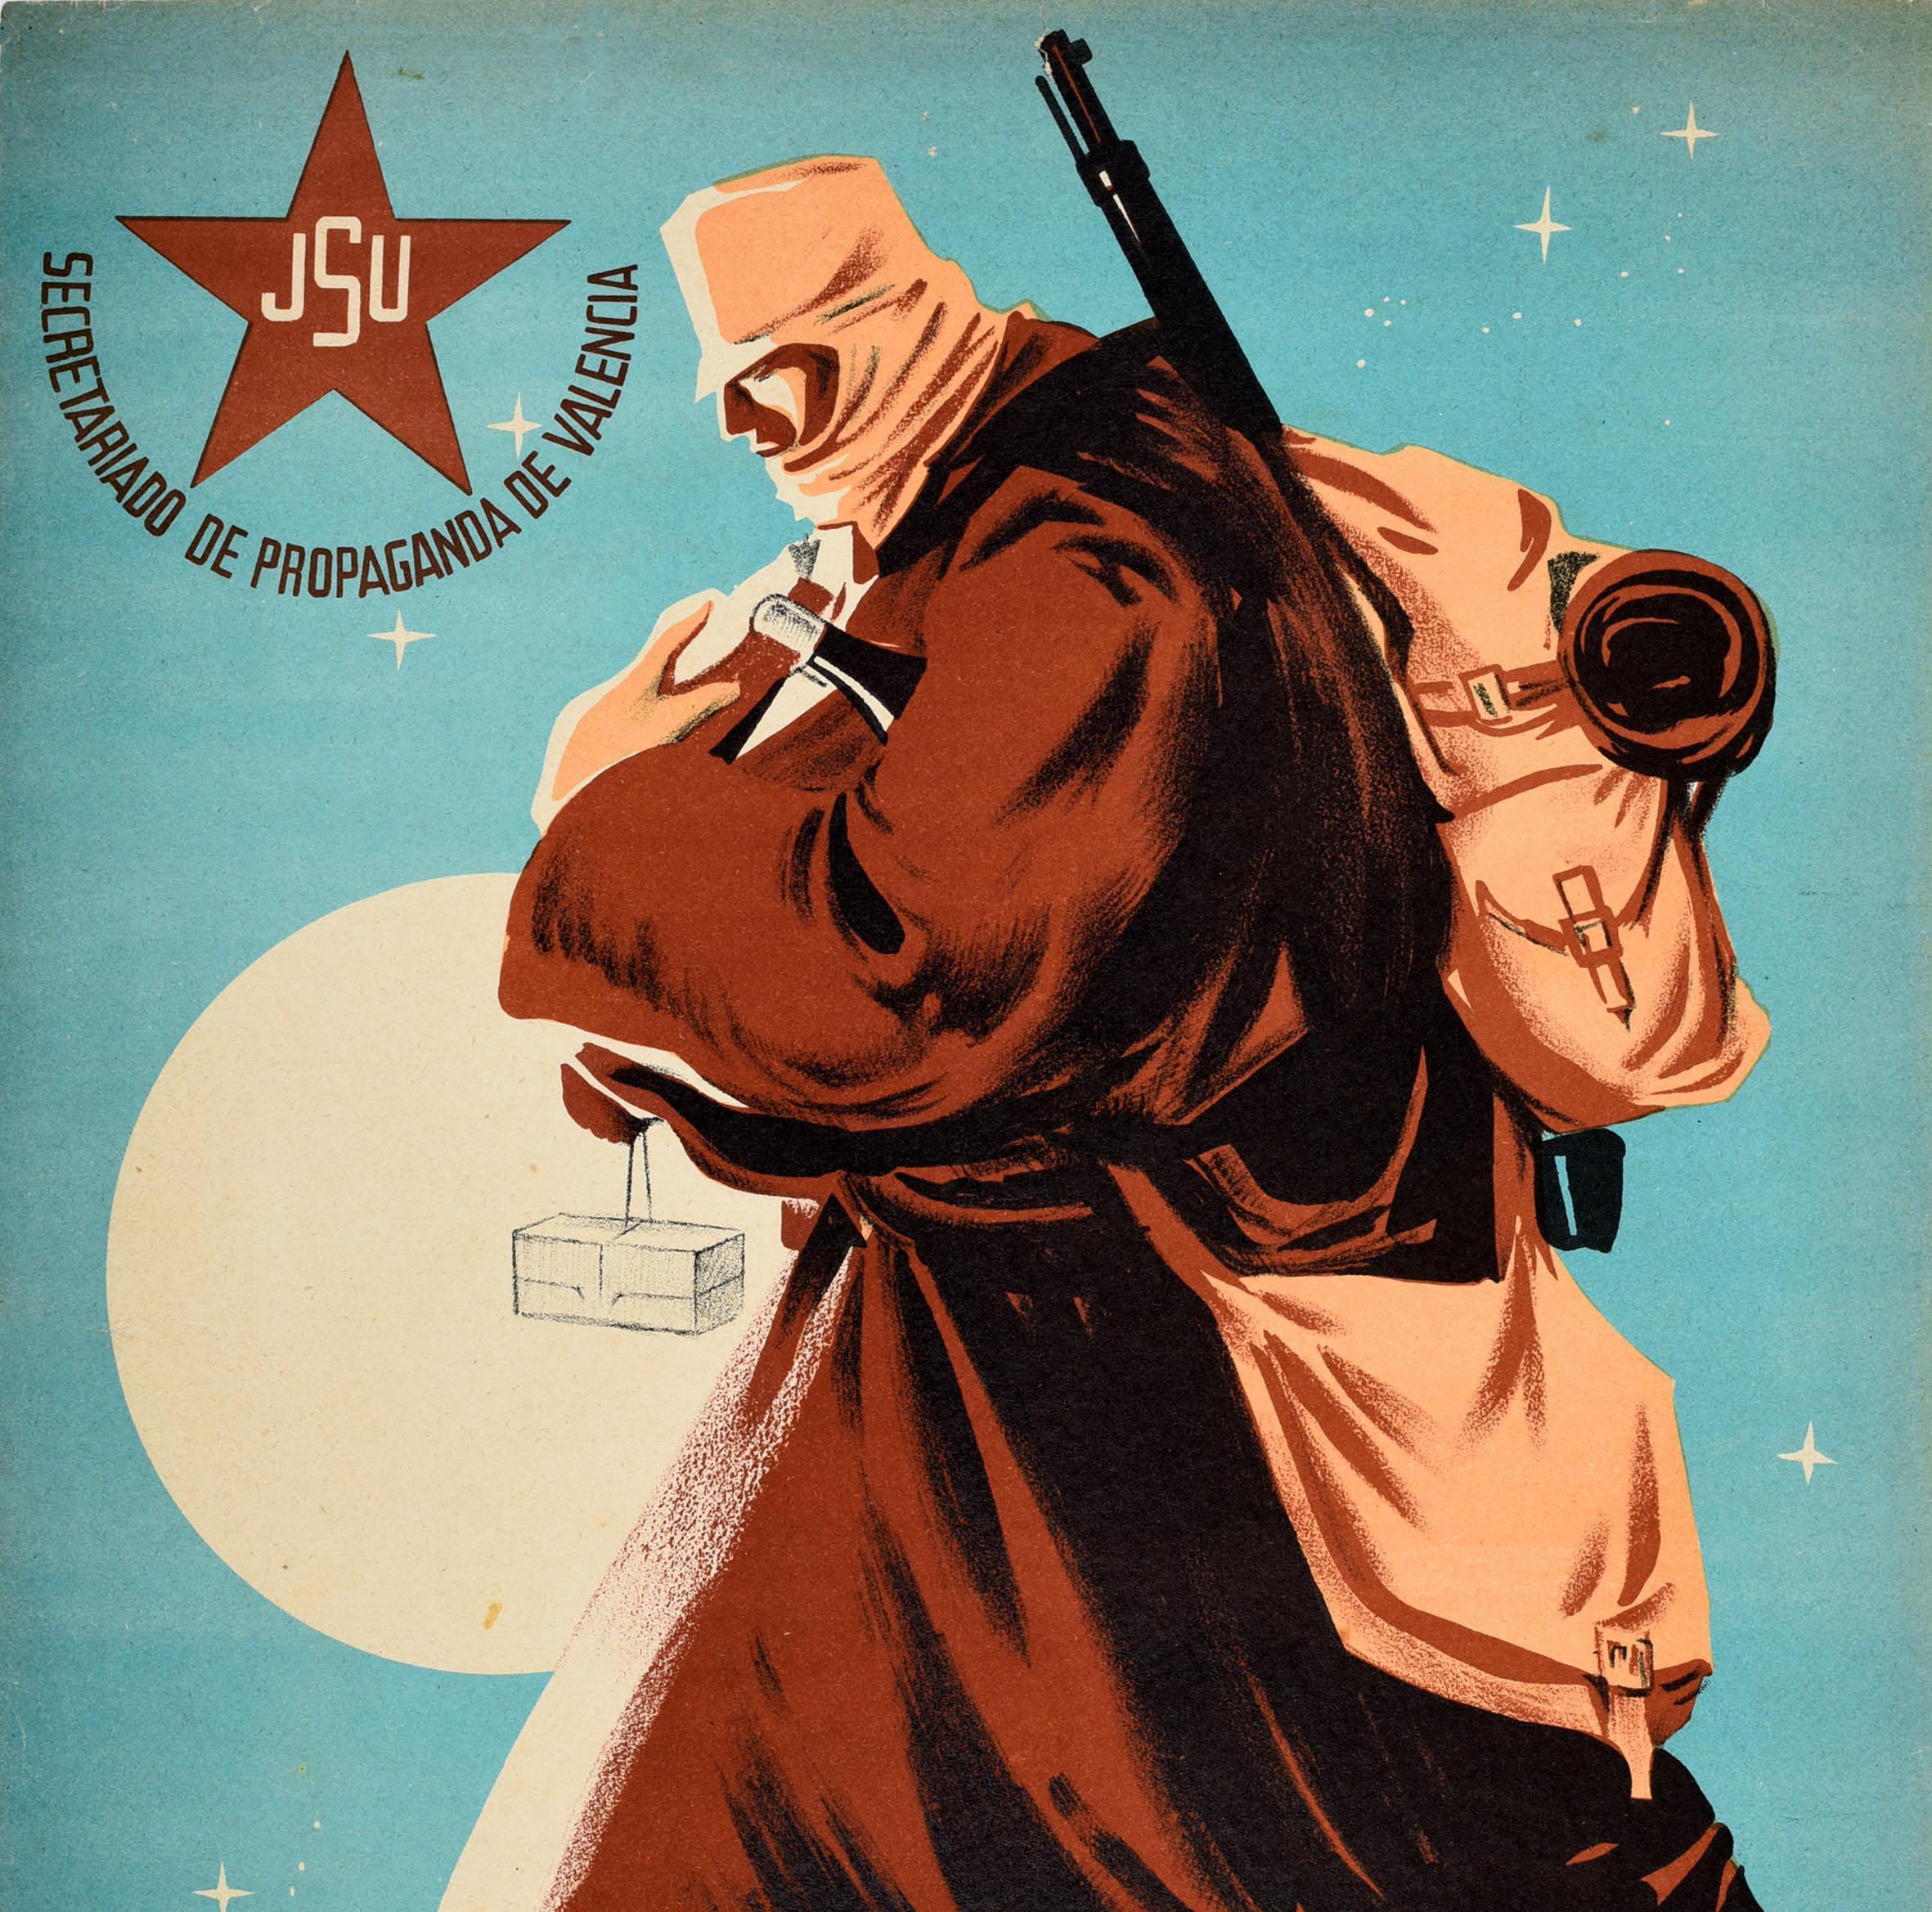 Original vintage Spanish Civil War propaganda poster - The Militiaman's Reward / El Aguinaldo Del Miliciano - featuring a dynamic design depicting a man in warm winter clothing holding a gun and backpack walking in the snow in front of a full moon